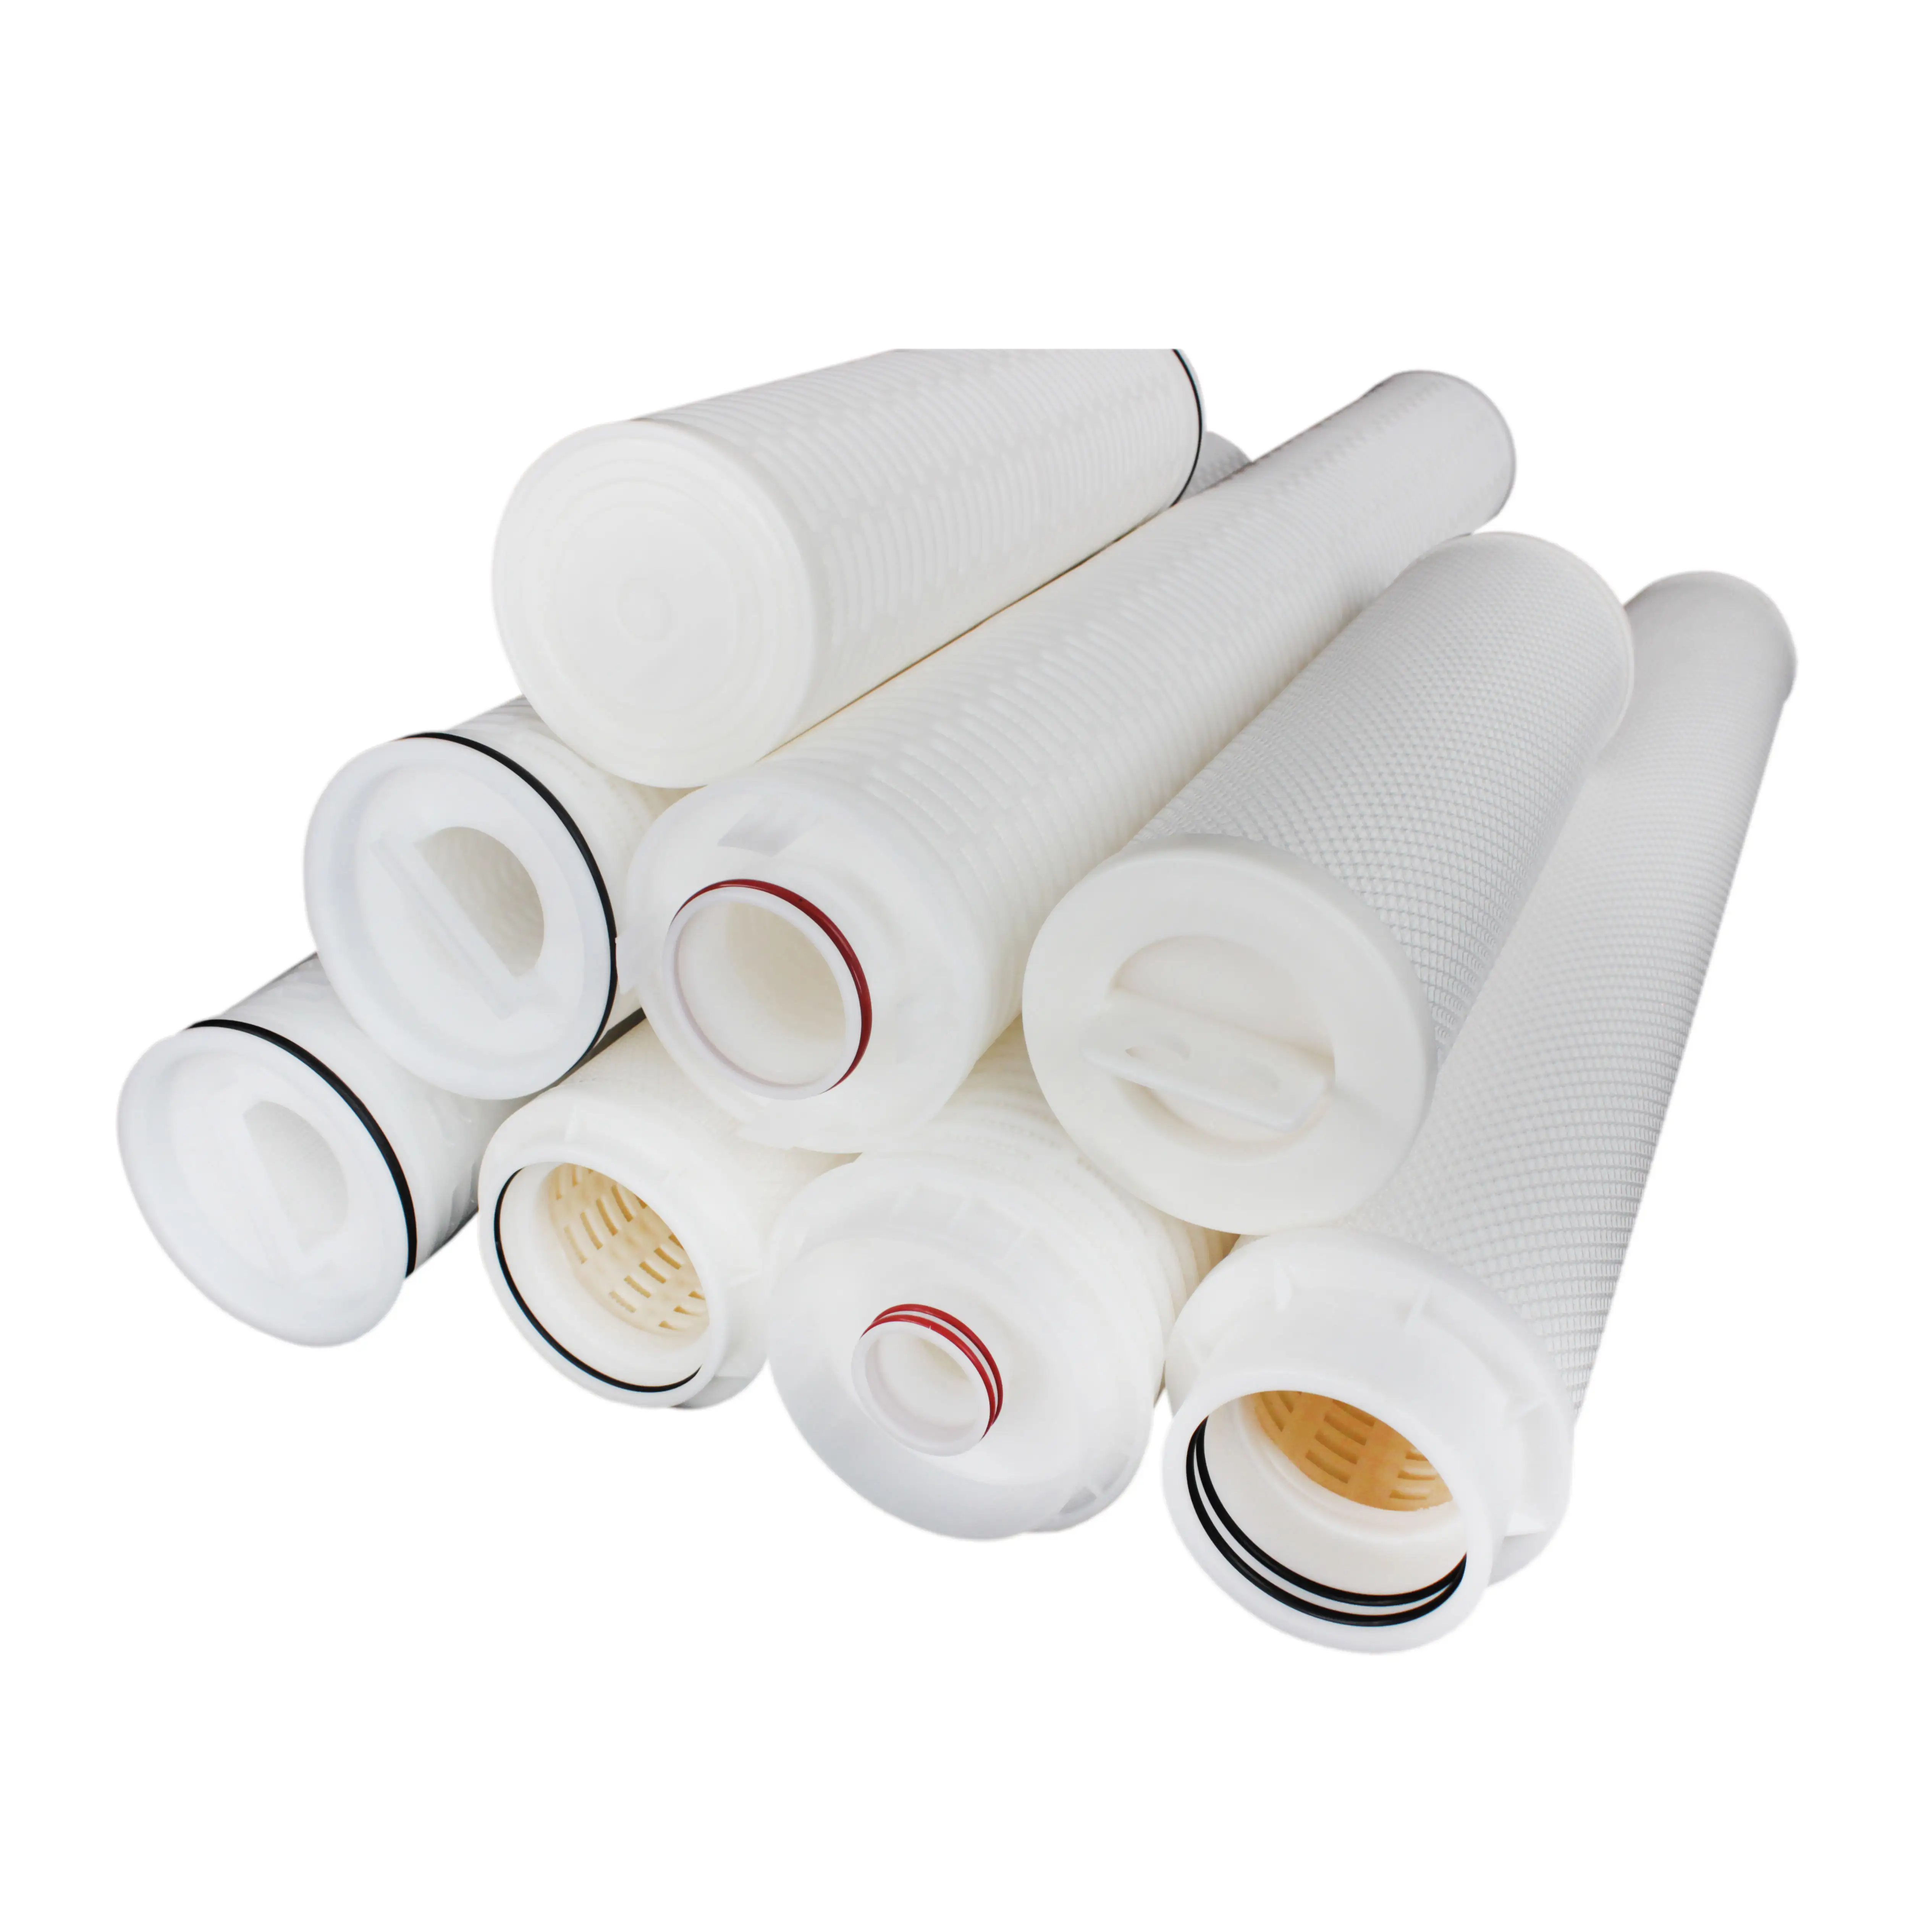 3M PAL Water Filter Replacement Cartridge House Water Filter Cartridge High Flow Pleated Filter Cartridge